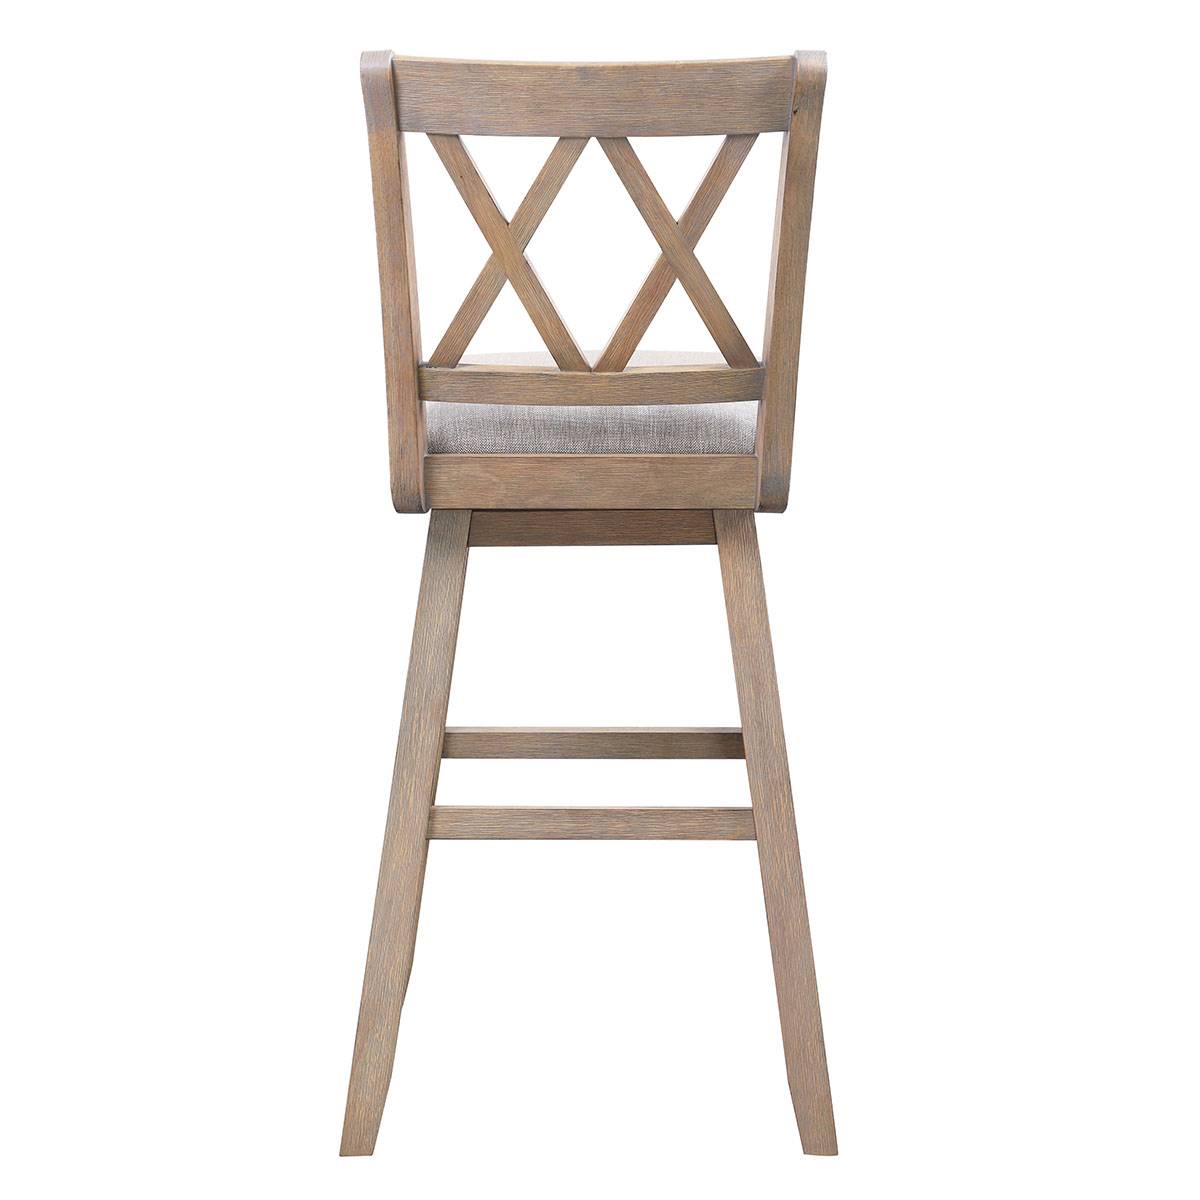 Home 2 Office 42.5in. Double Cross Back Bar Stool